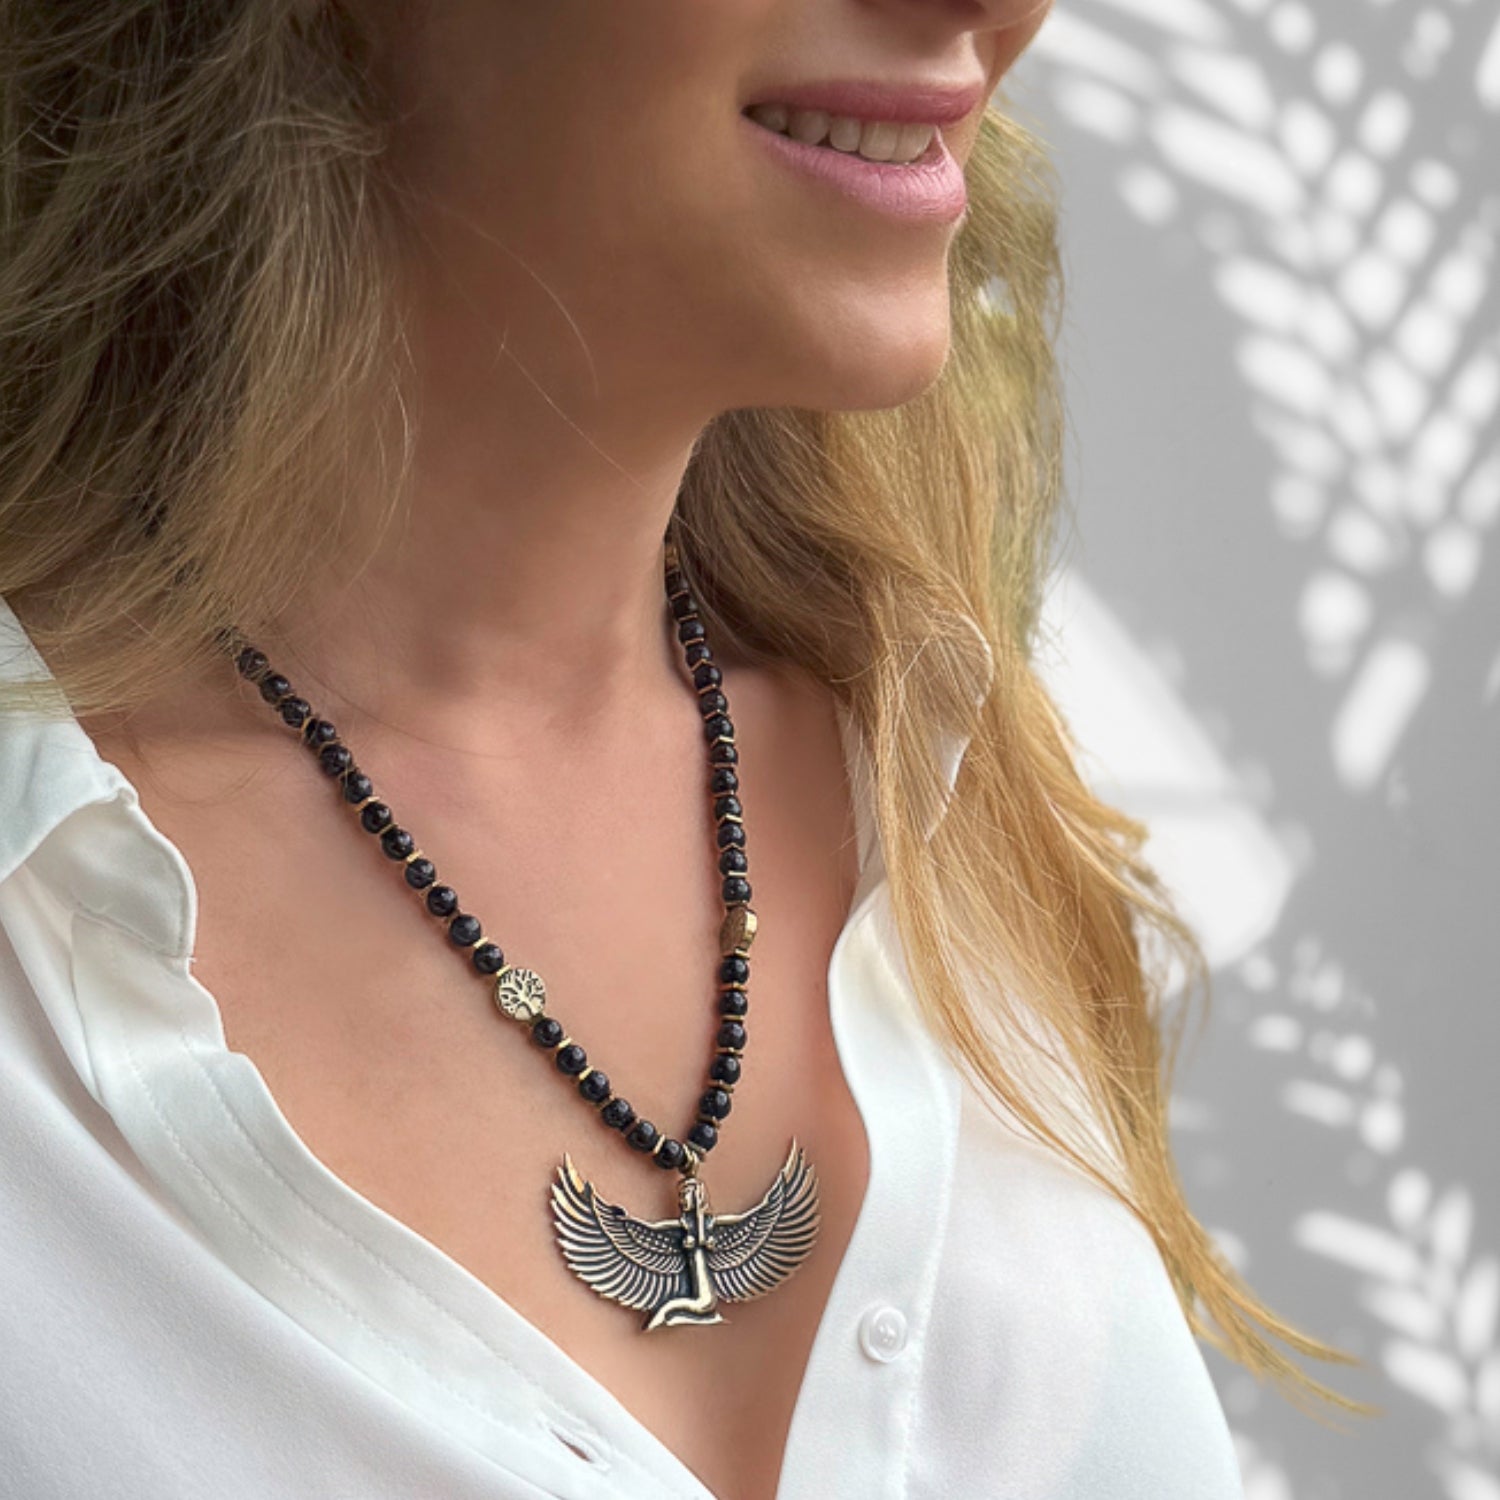 Magical Goddess Isis Pendant Black Beaded Necklace